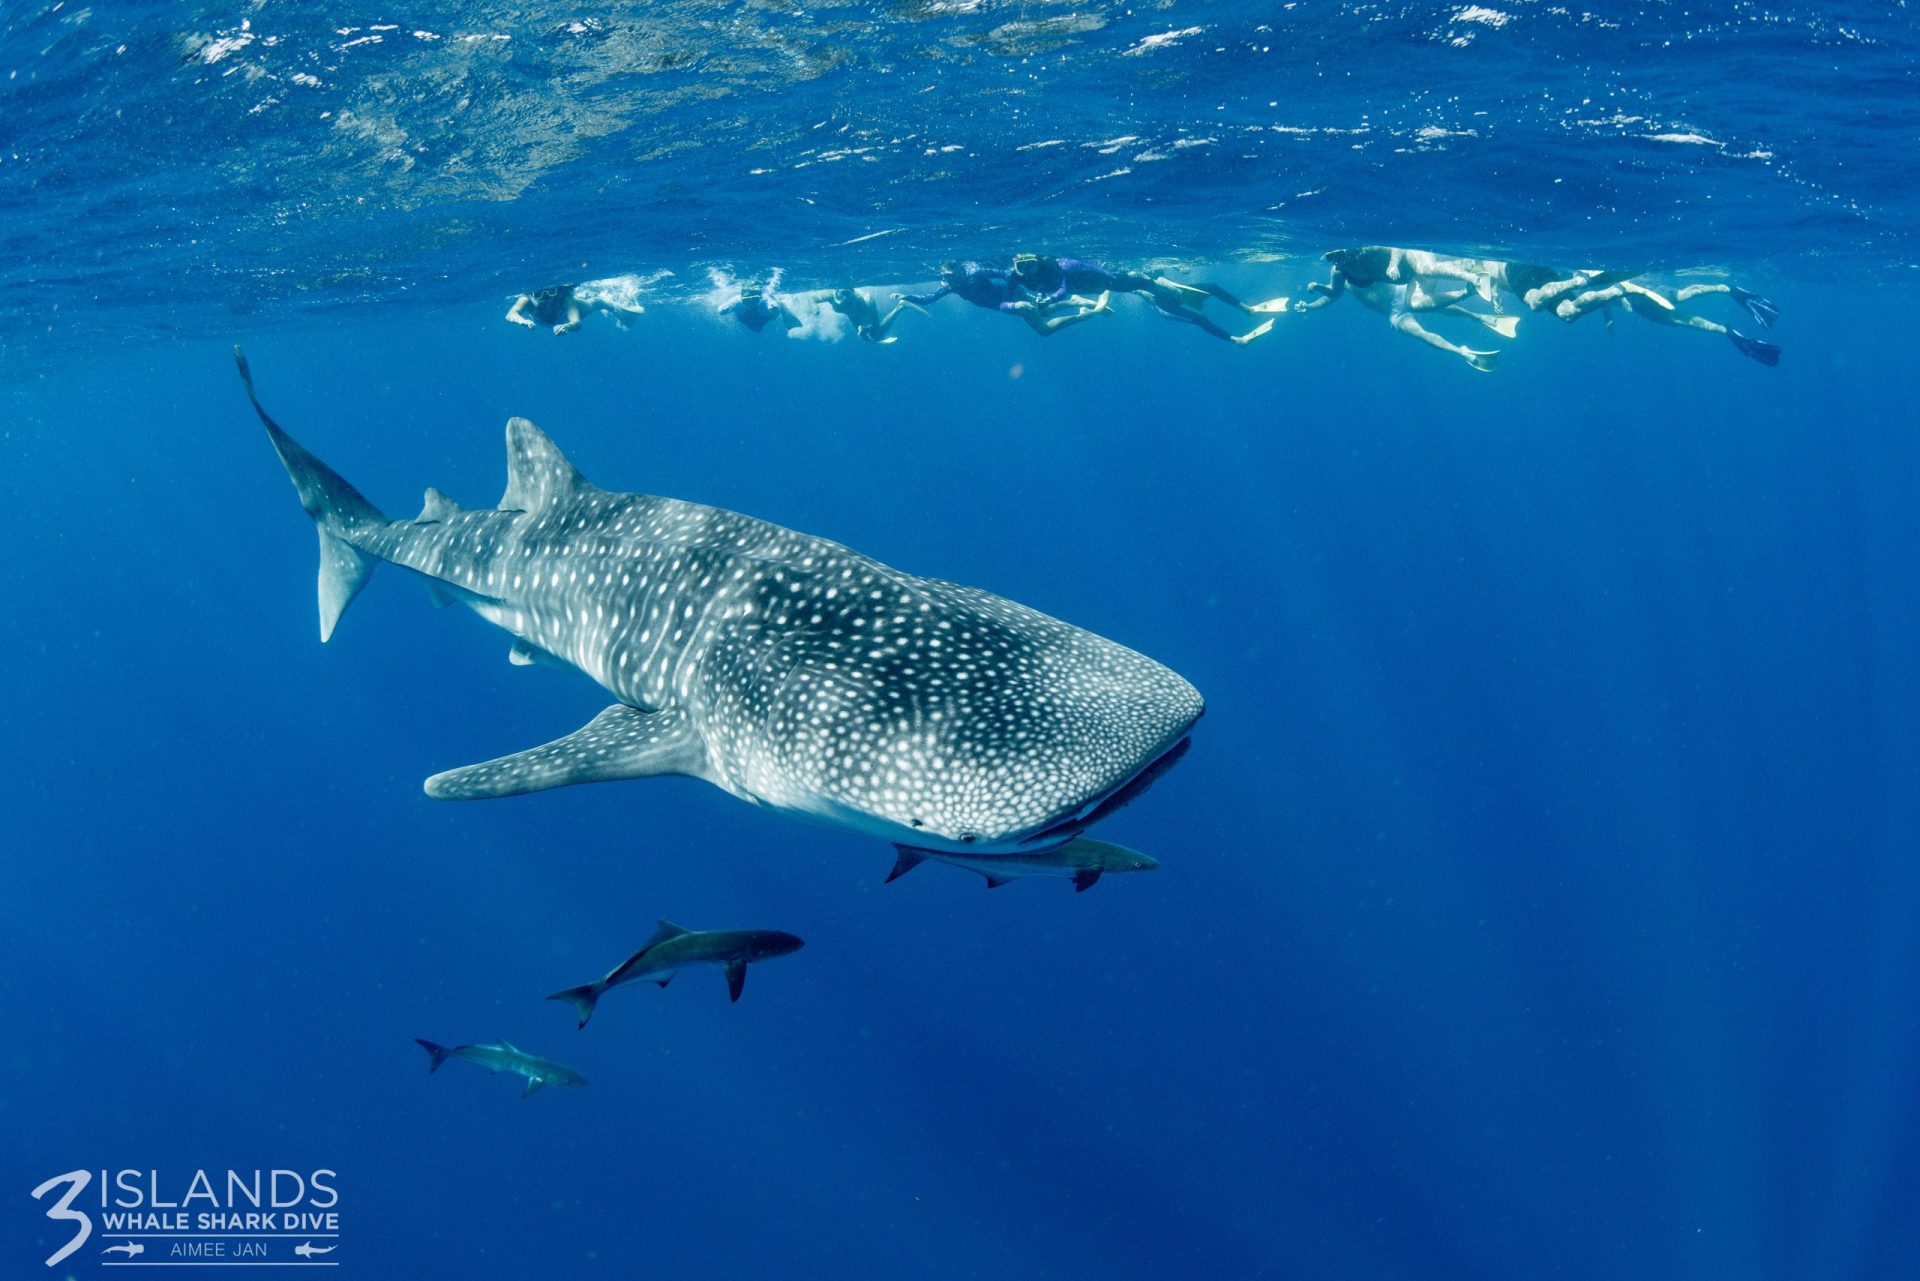 When is the whale shark season in Exmouth